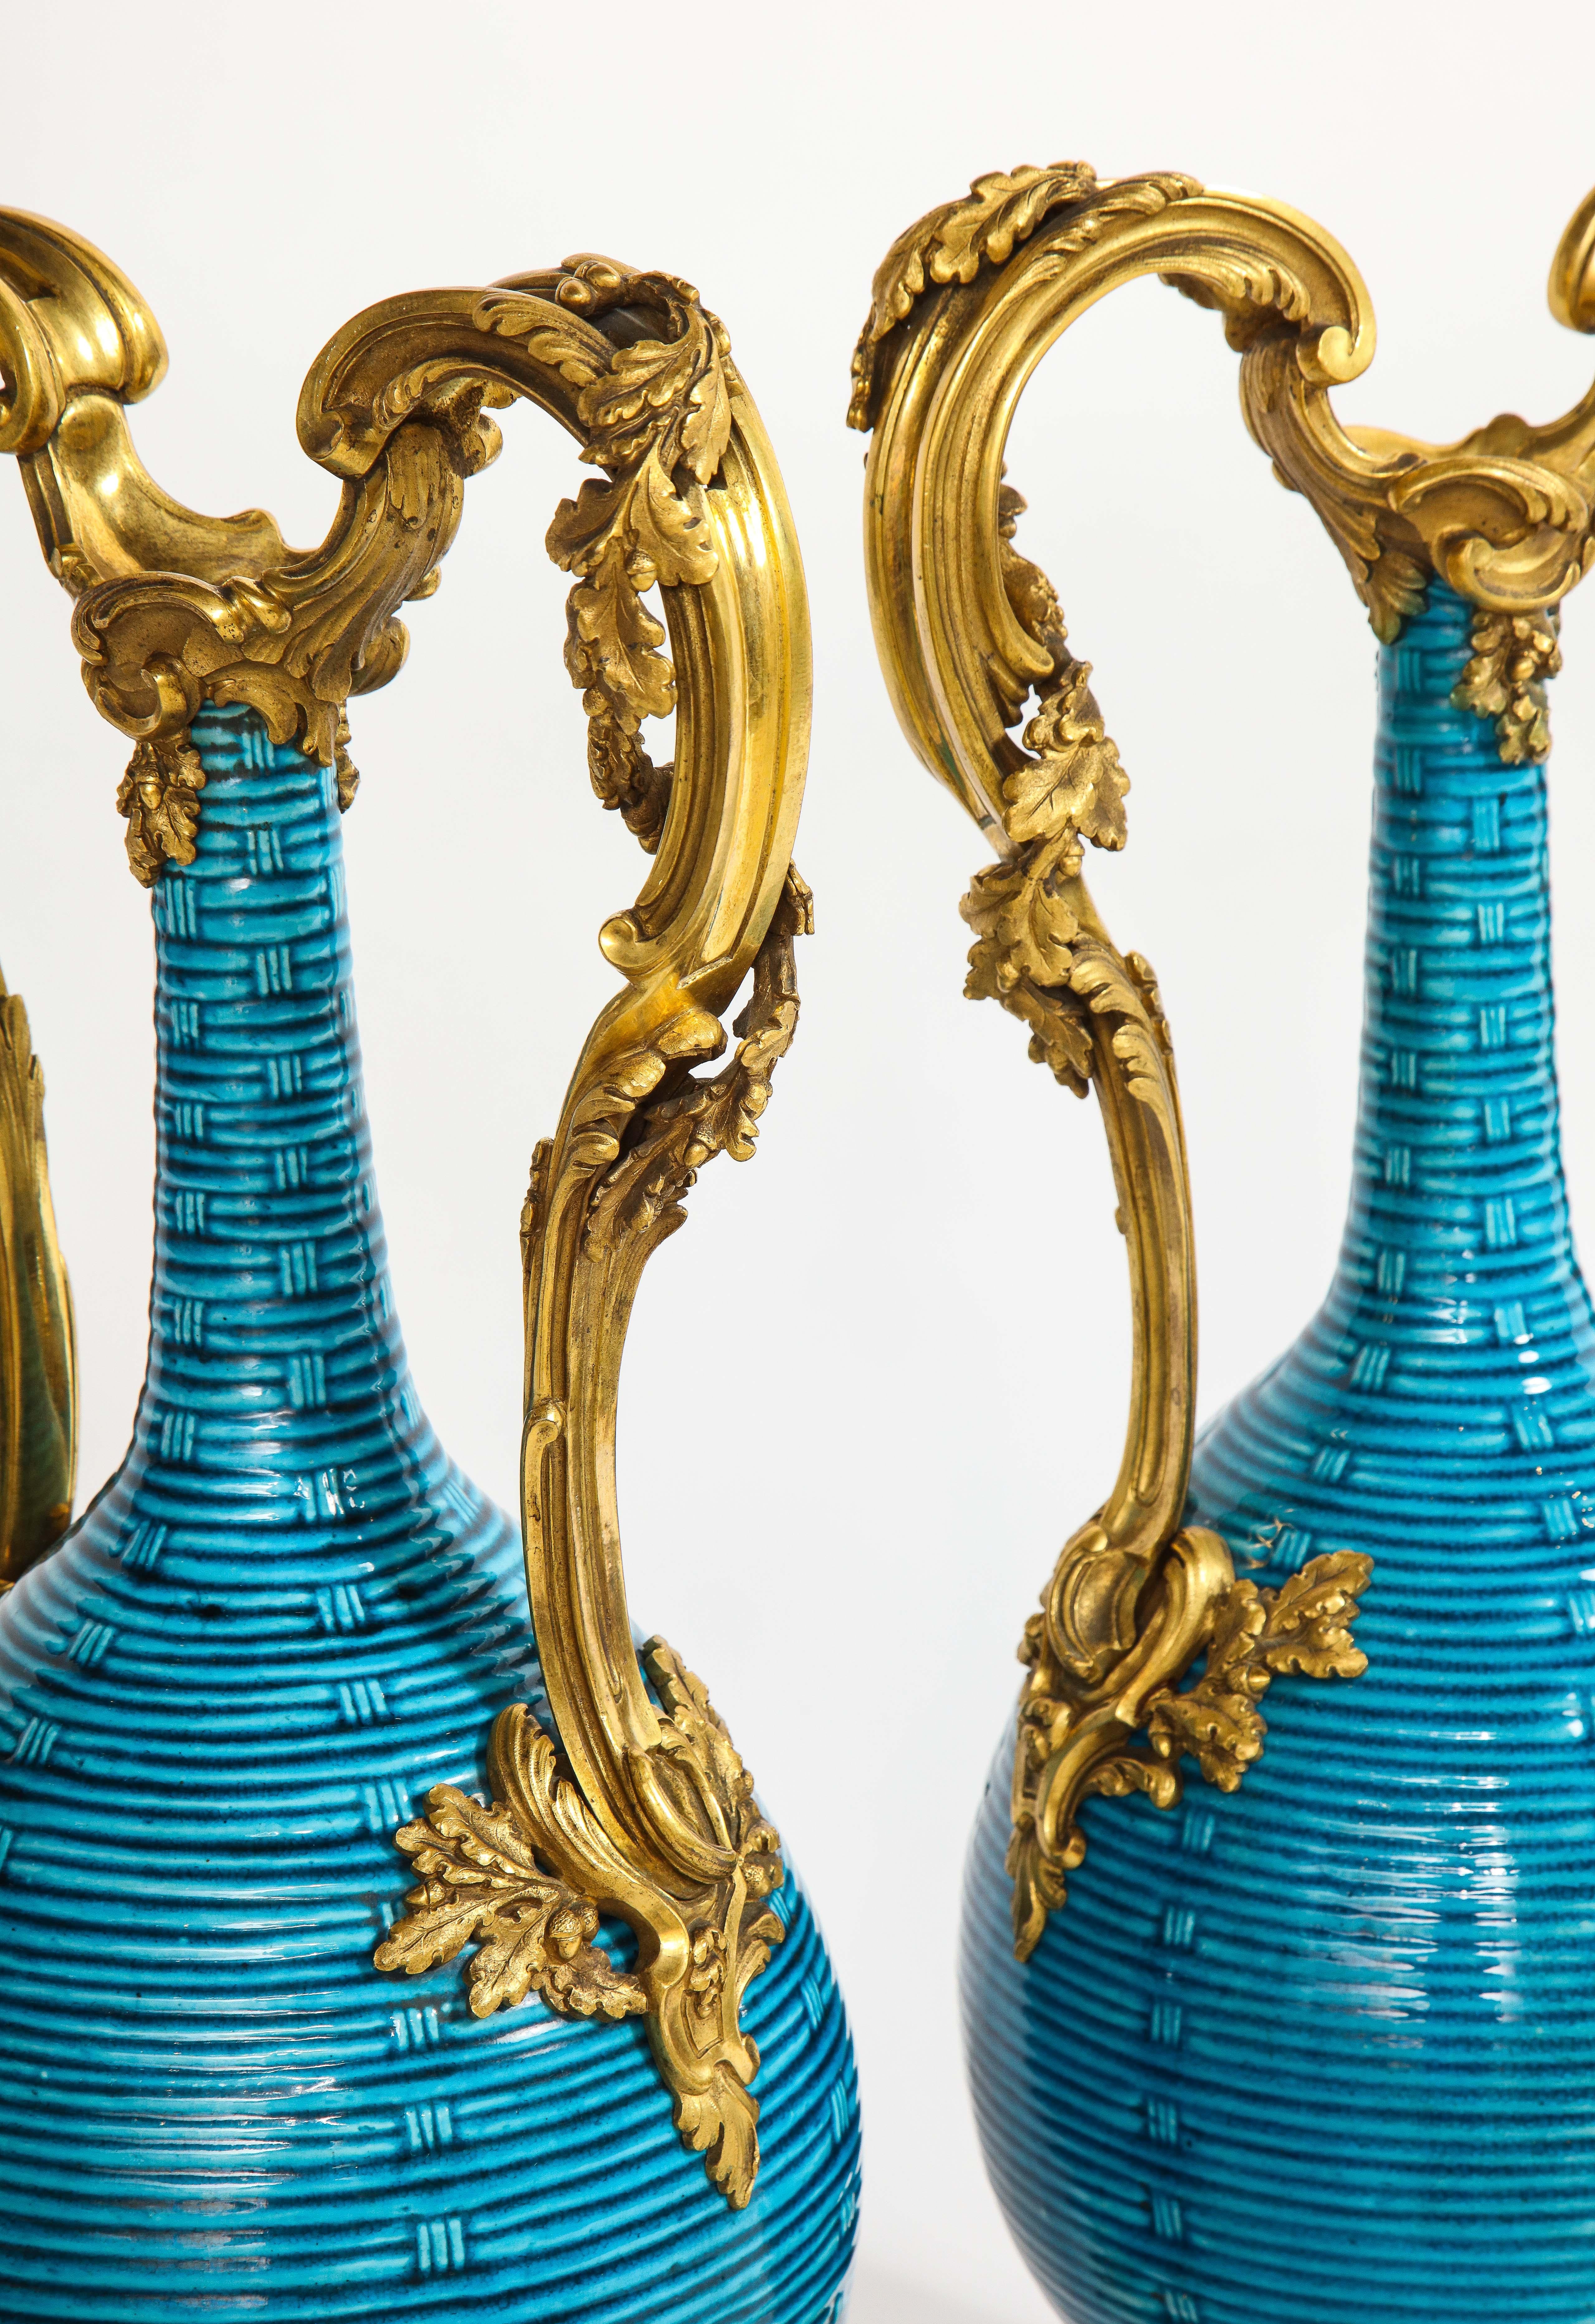 Massive Pair of Chinese Turquoise Porcelain, French Dore Bronze Mounted Vases For Sale 1